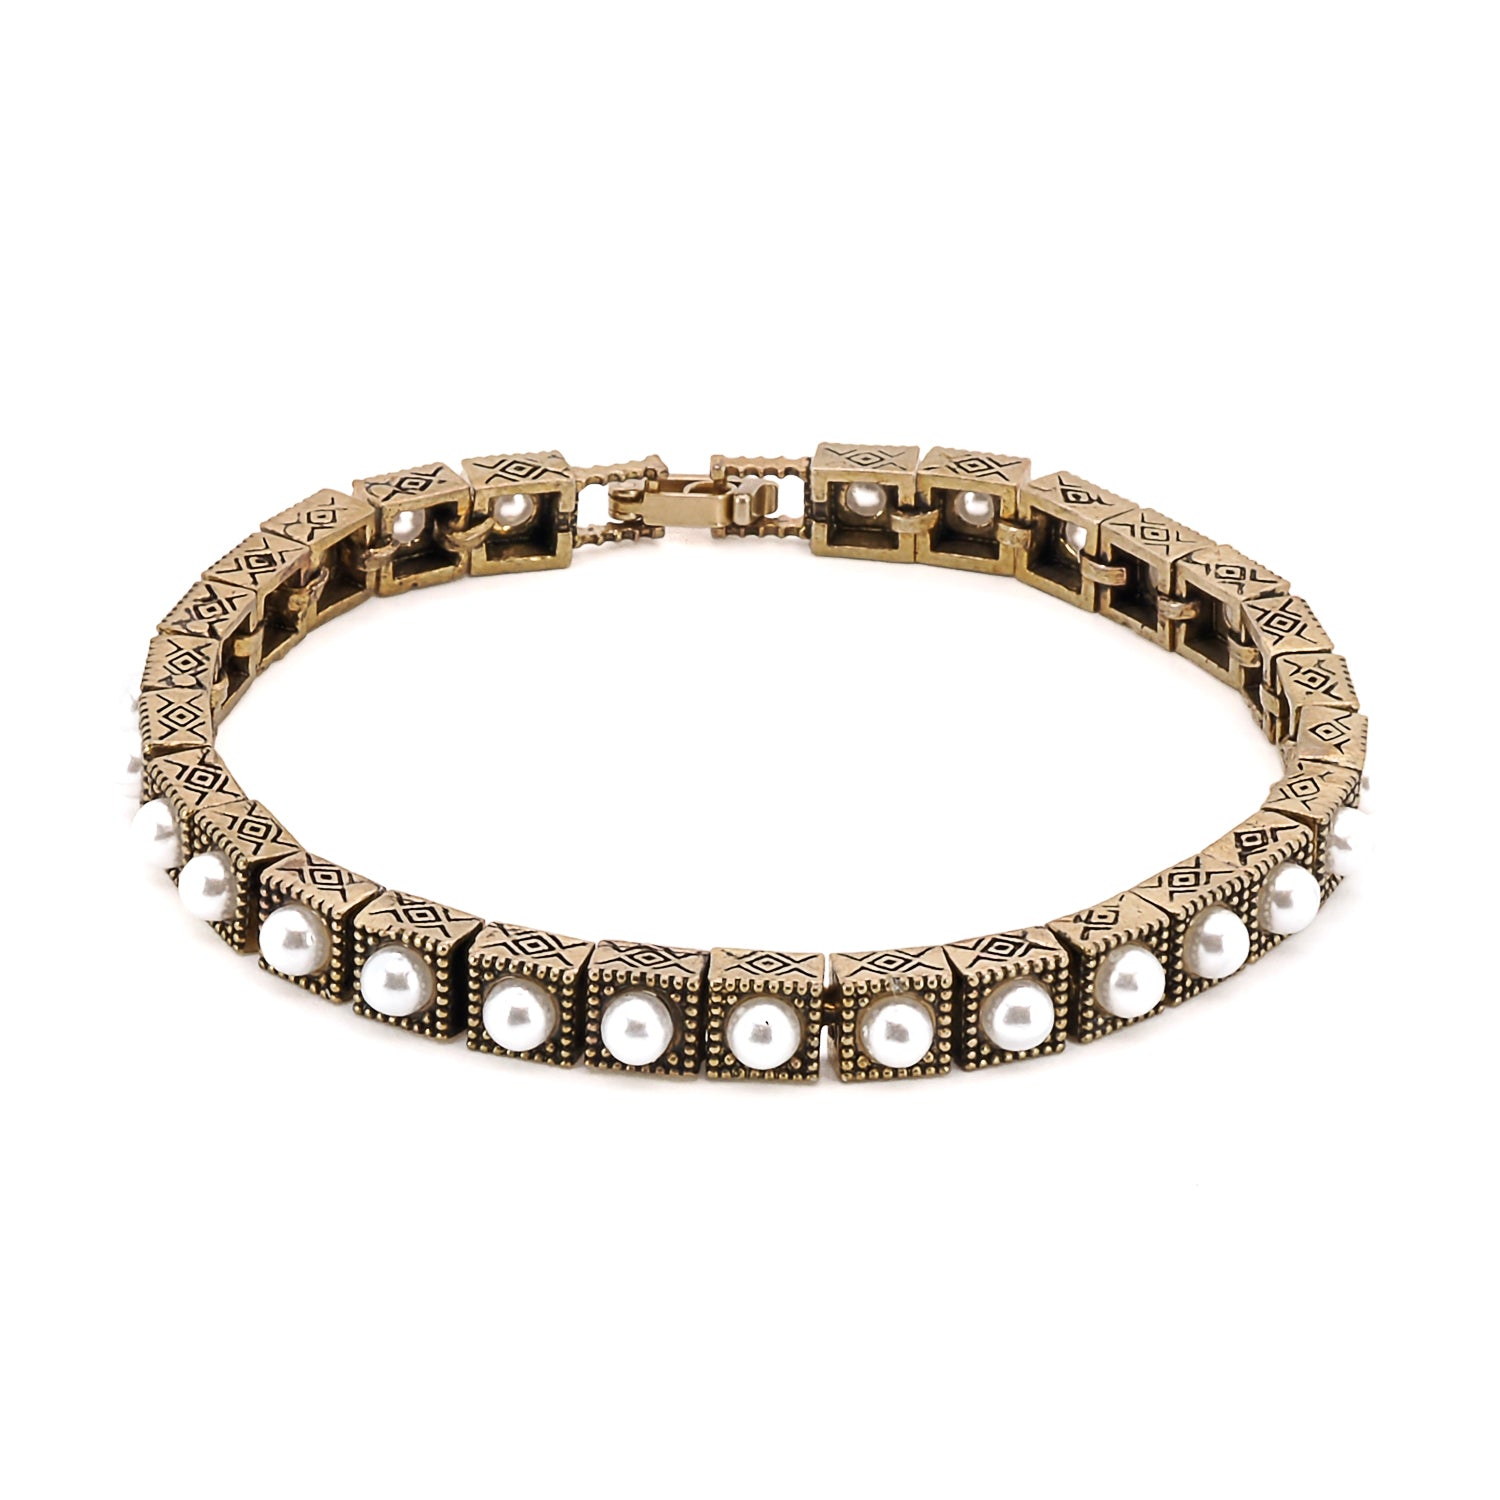 The lustrous Pearl Tennis Bracelet, featuring high-quality bronze links.